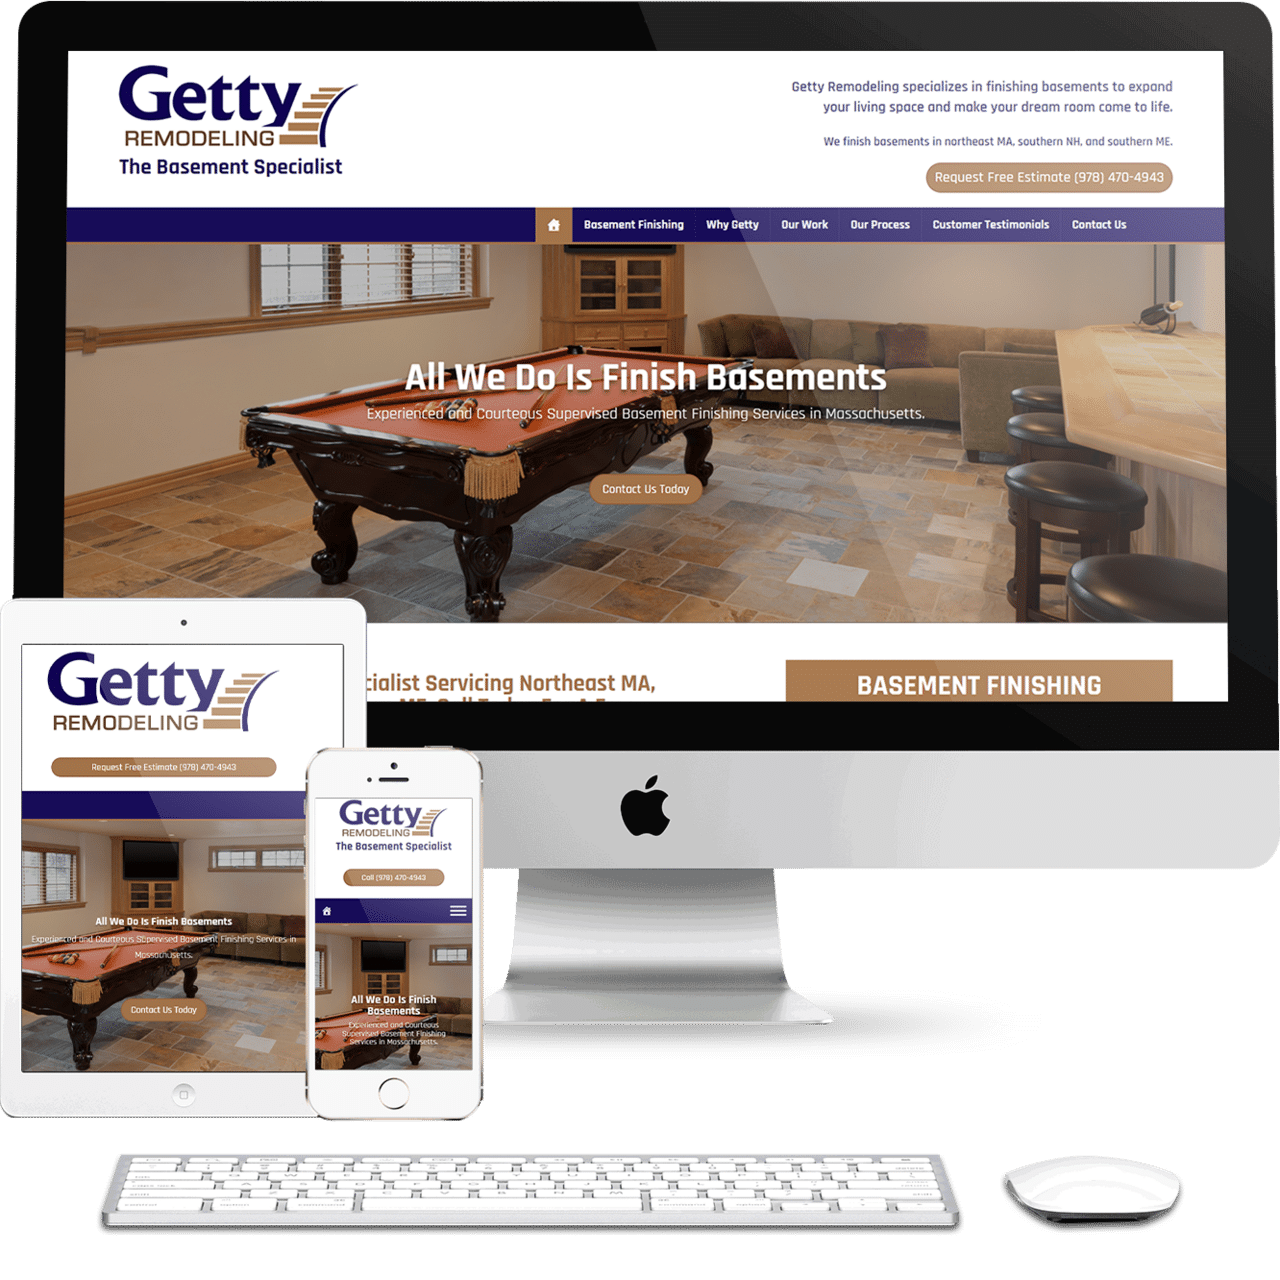 Getty Remodeling